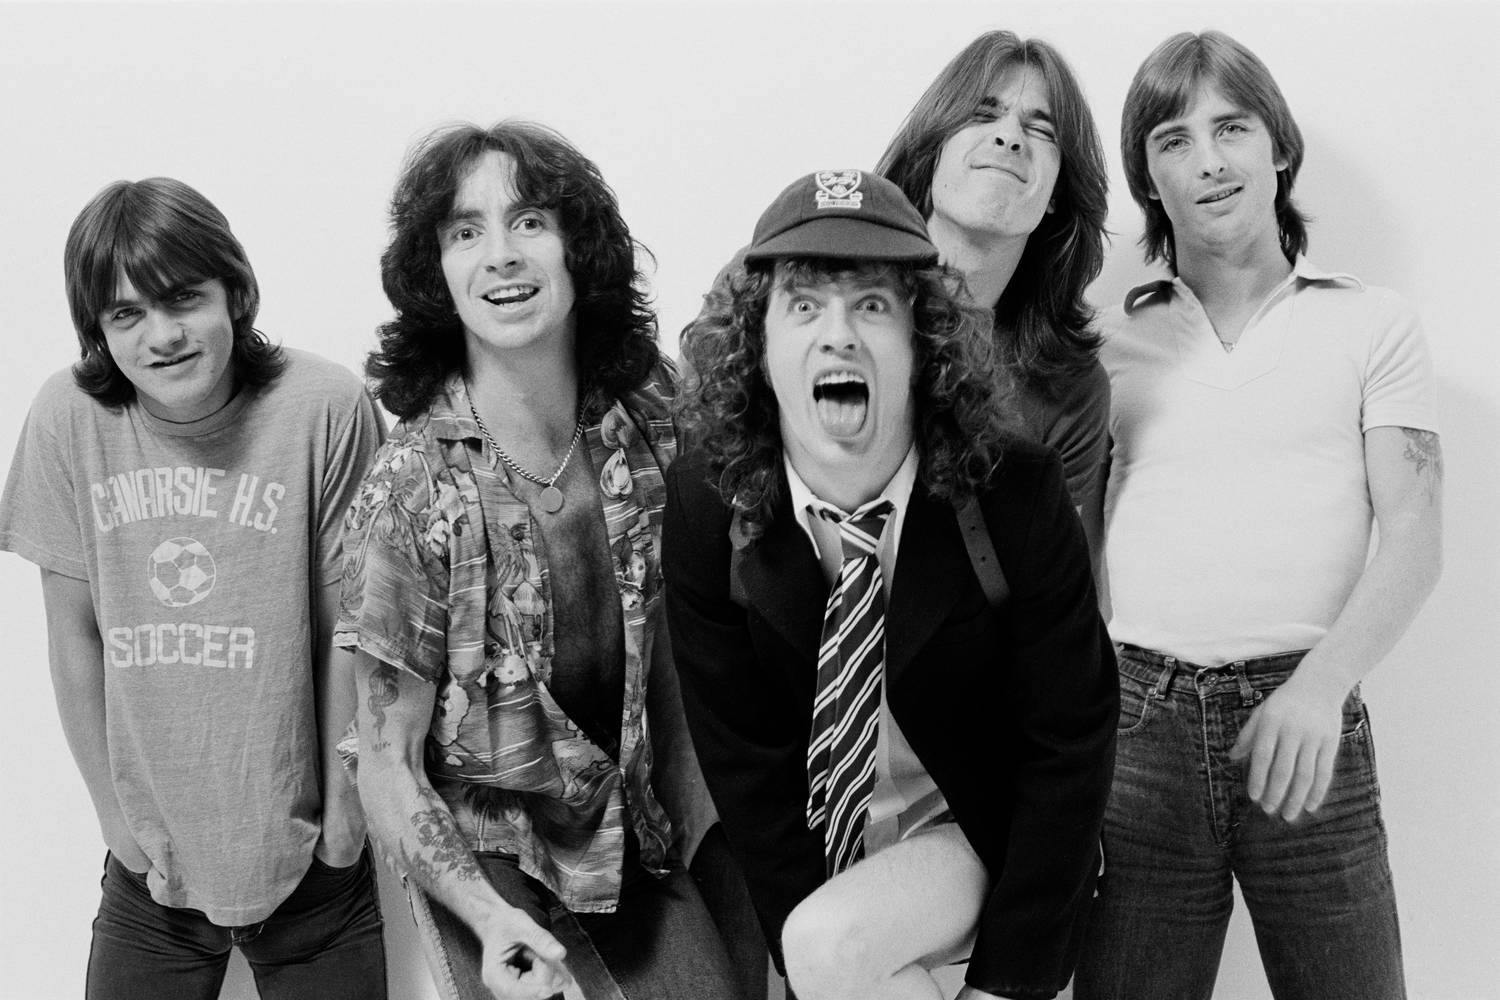 Watch This Rare Footage Of AC/DC Live On TV In 1979